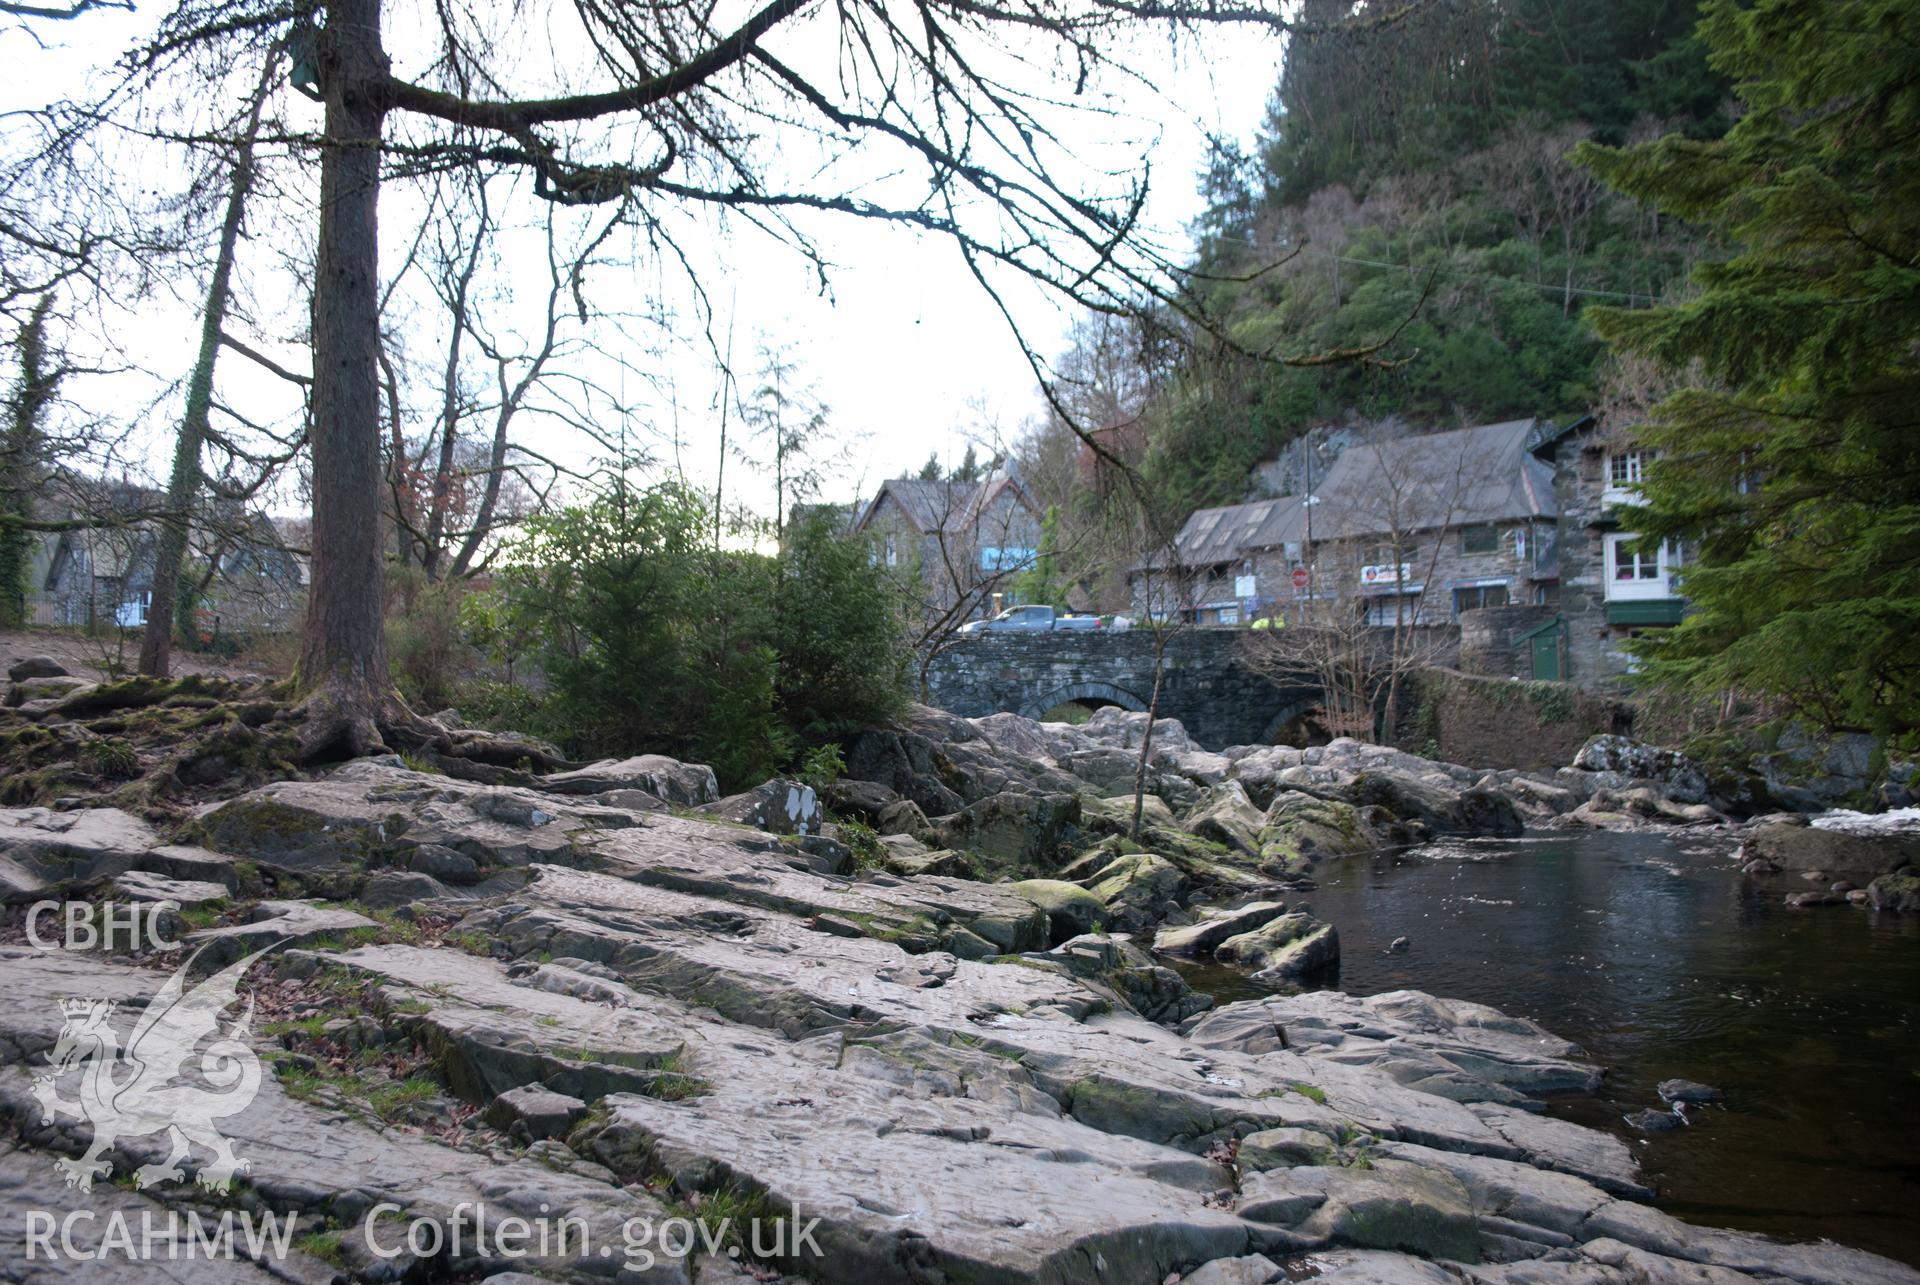 General view from the west of Pont y Pair bridge from the riverbank and waterfall. Digital photograph taken for Archaeological Watching Brief at Pont y Pair, Betws y Coed, 2019. Gwynedd Archaeological Trust Project no. G2587.